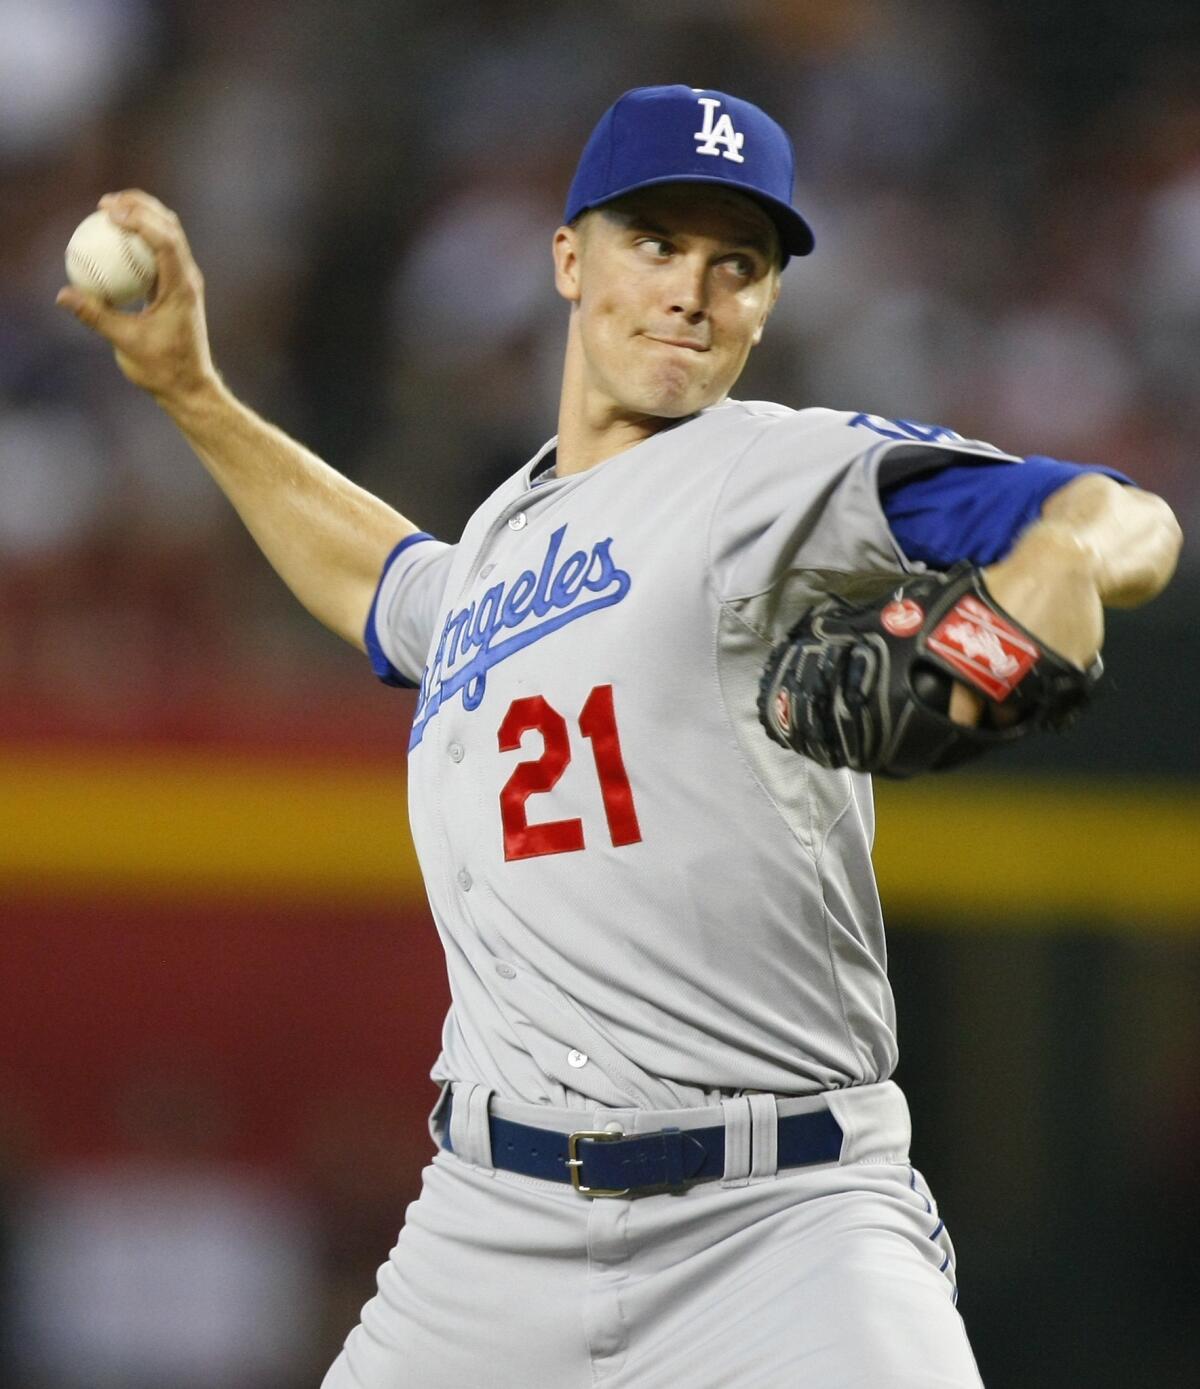 Dodgers starter Zack Greinke delivers a pitch during the first inning of Monday's 6-1 victory over the Arizona Diamondbacks.